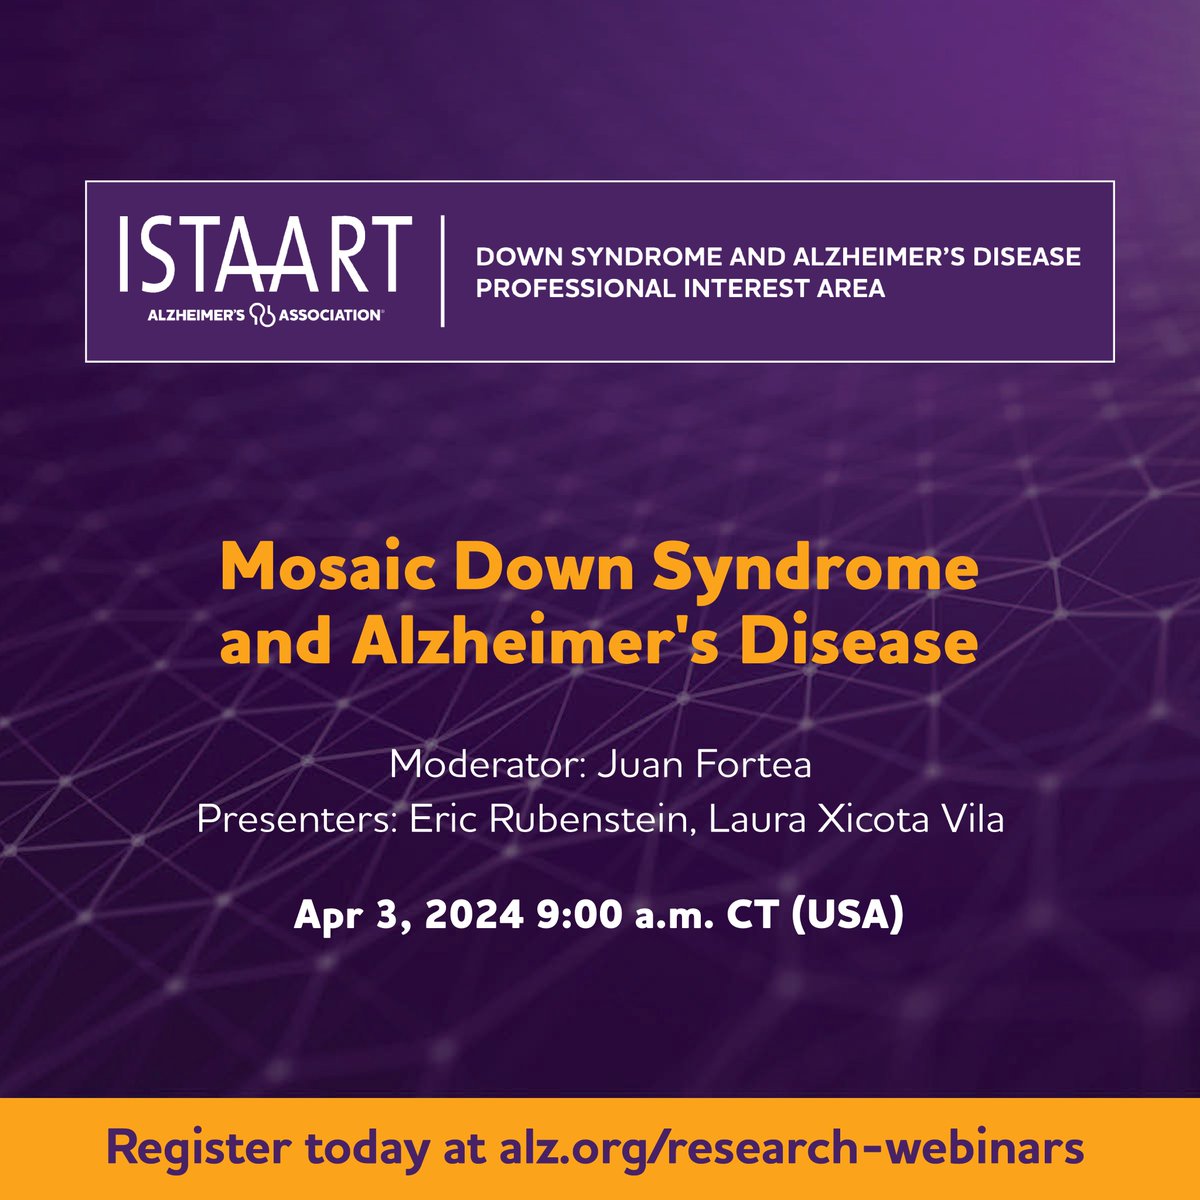 🔔Please join us for a webinar on Apr 3, 2024, at 9:00 am CT (USA): 'Mosaic Down syndrome and Alzheimer's Disease' Panelists: Laura Xicota Vila and Eric Rubinstein Moderator: Juan Fortea Remember to register! alz-org.zoom.us/webinar/regist… @ISTAART @alzassociation #ENDALZ